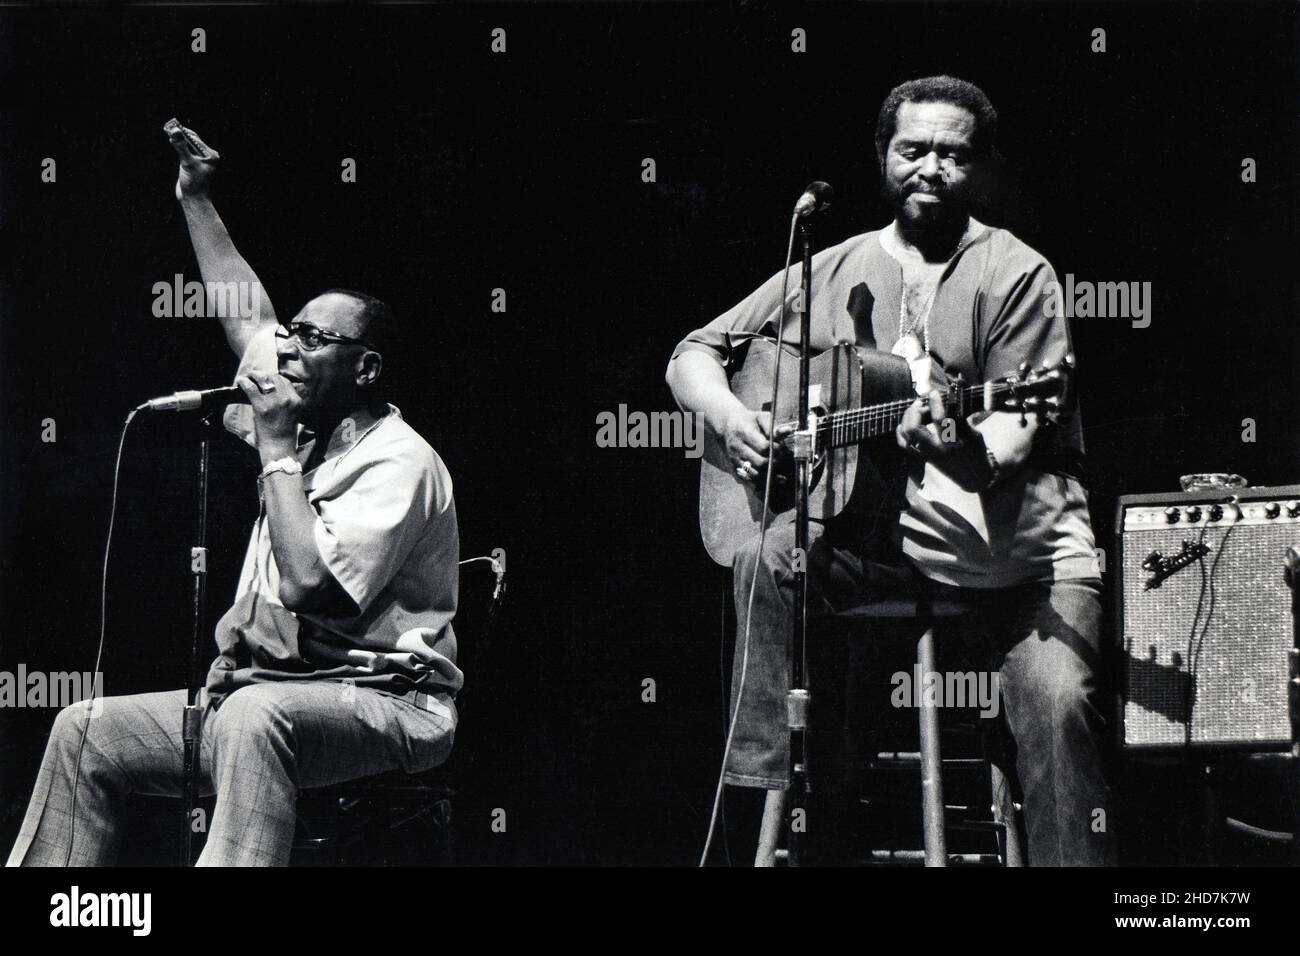 The blues & folk music duo of Sonny Terry and Brownie McGhee performing at the Other End club in Greenwich Village in the mid 1970s. Stock Photo